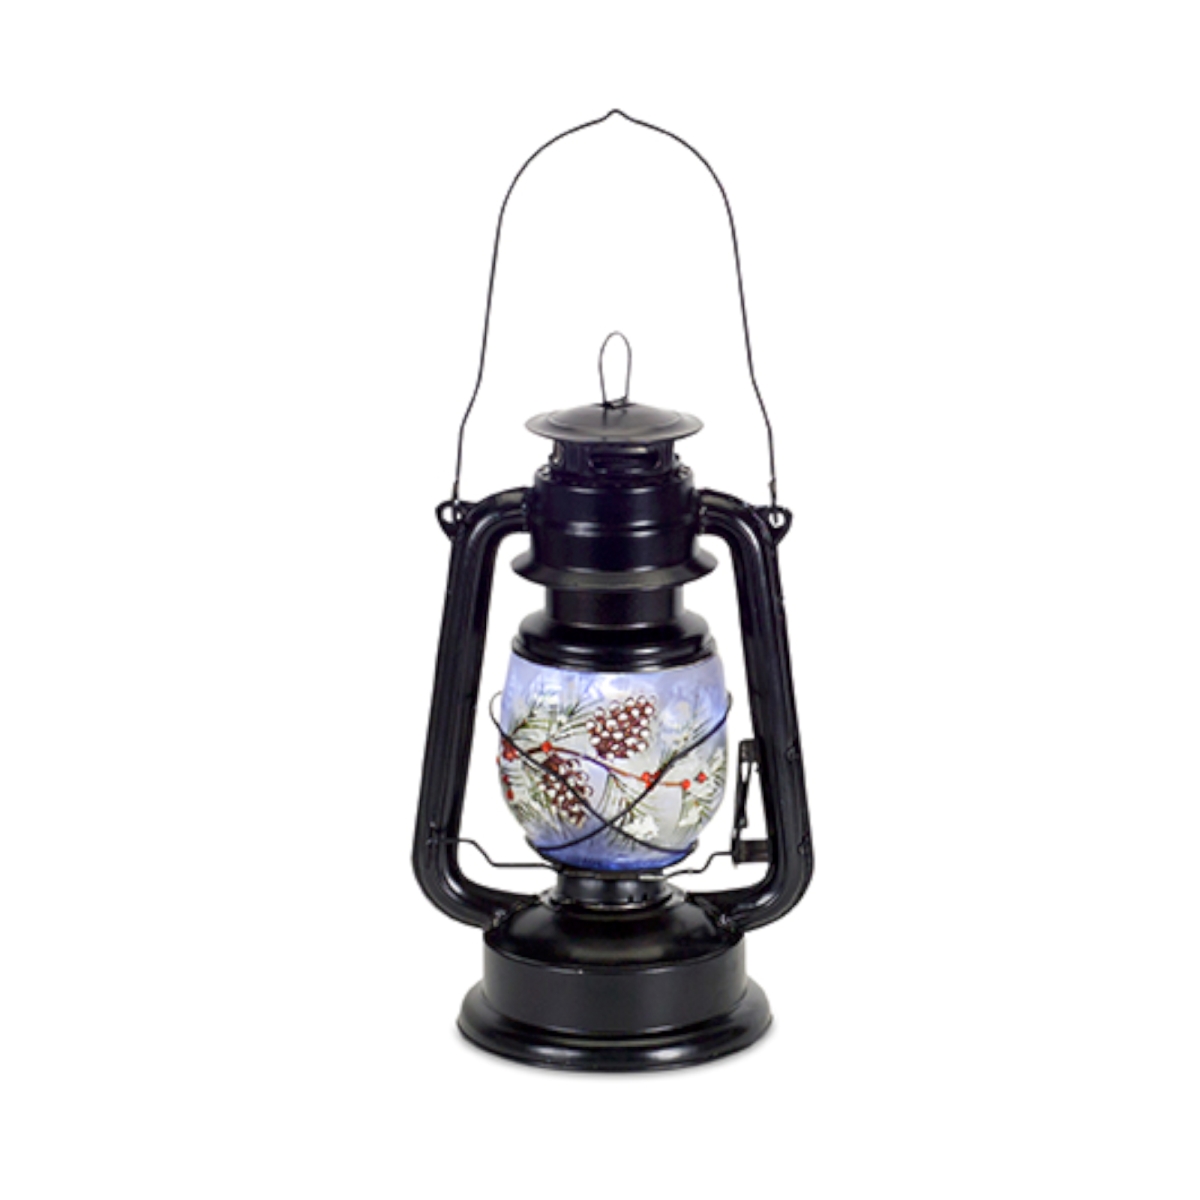 73128ds 12.25 In. Lantern With Pine Branch & Timer Glass - Black & White